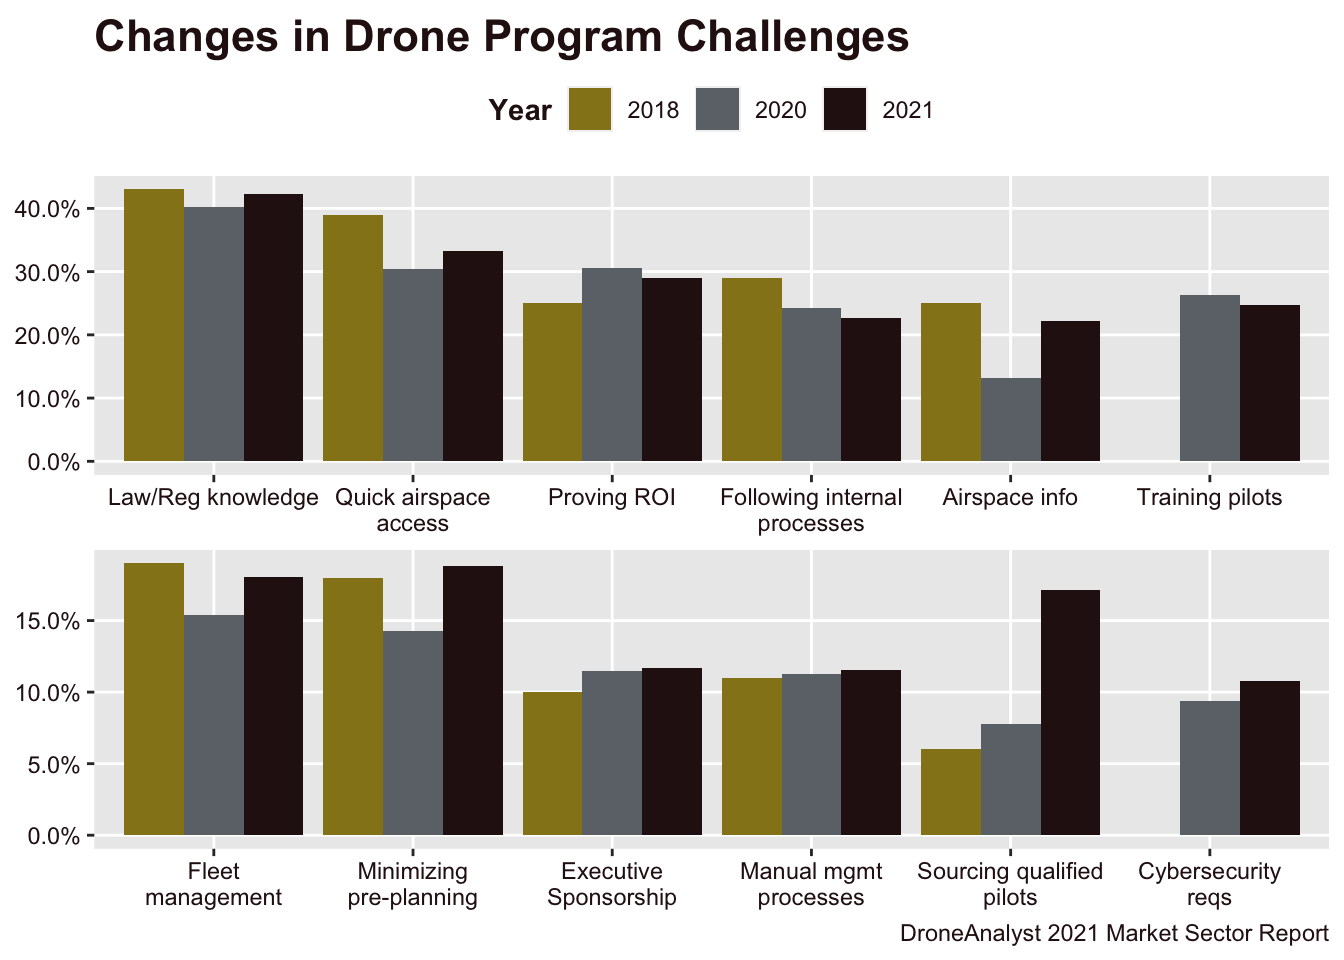 Changes in Drone Program Challenges